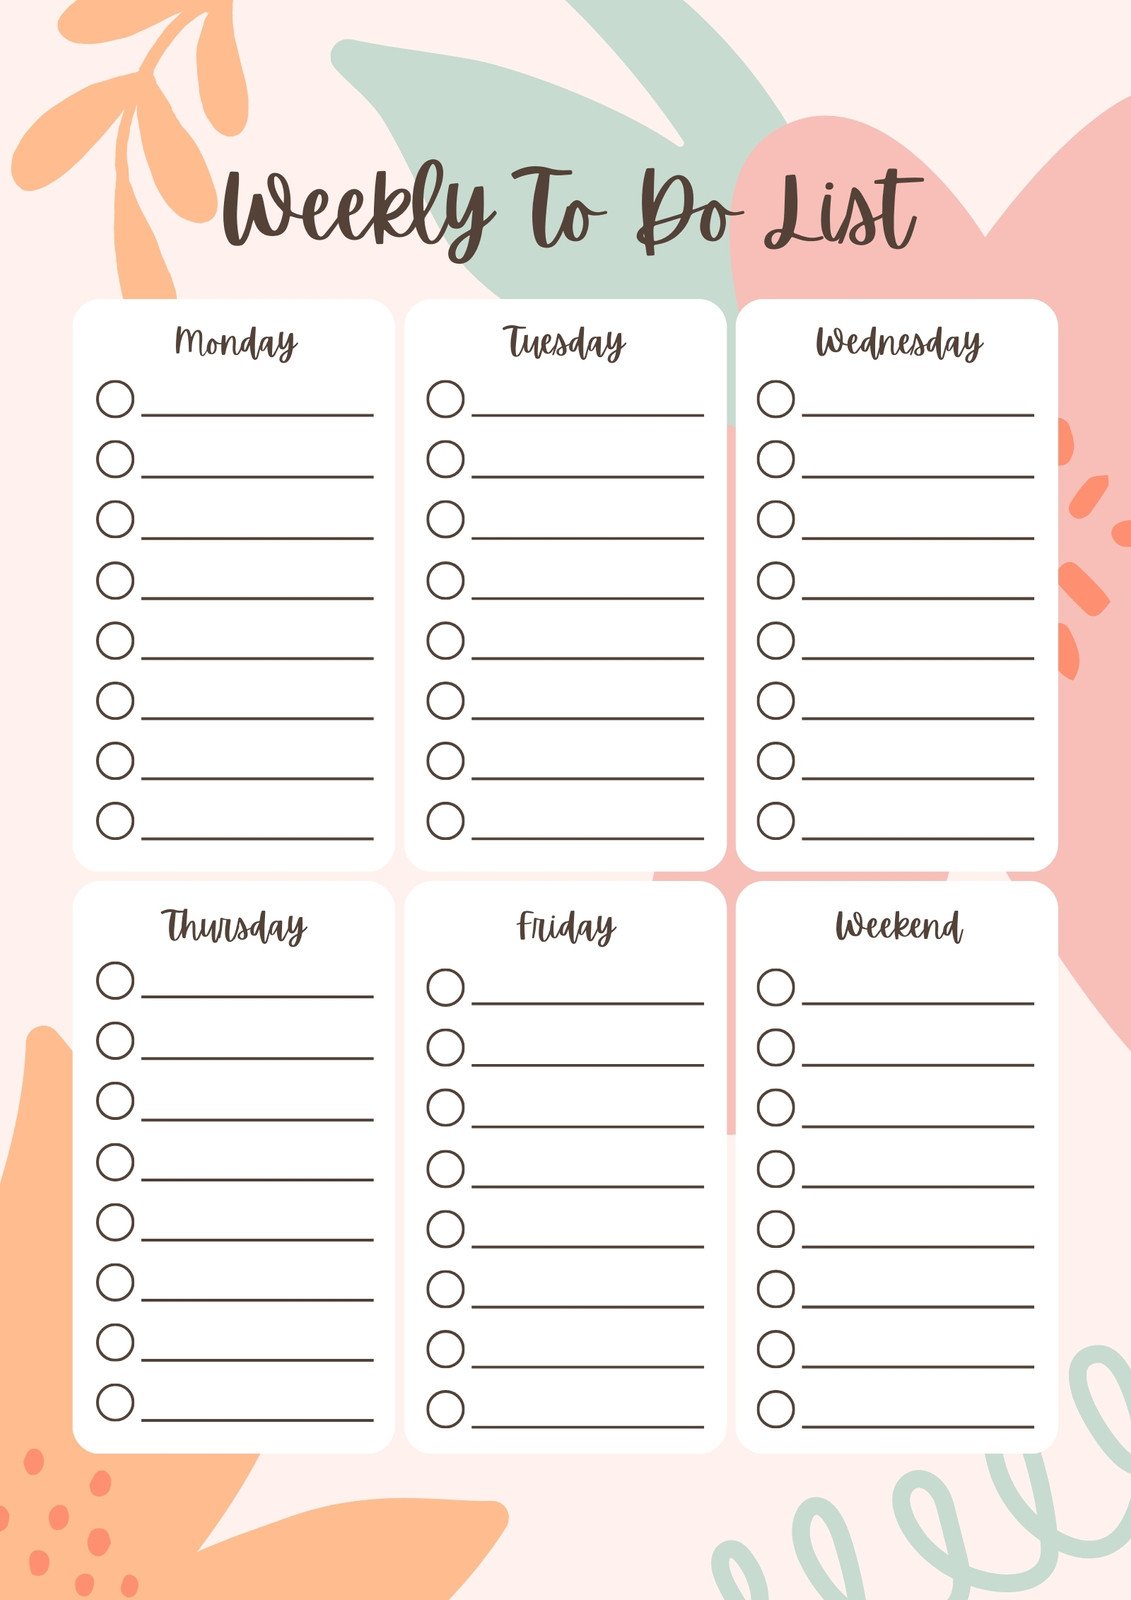 Weekly Planner Printable to Do List 